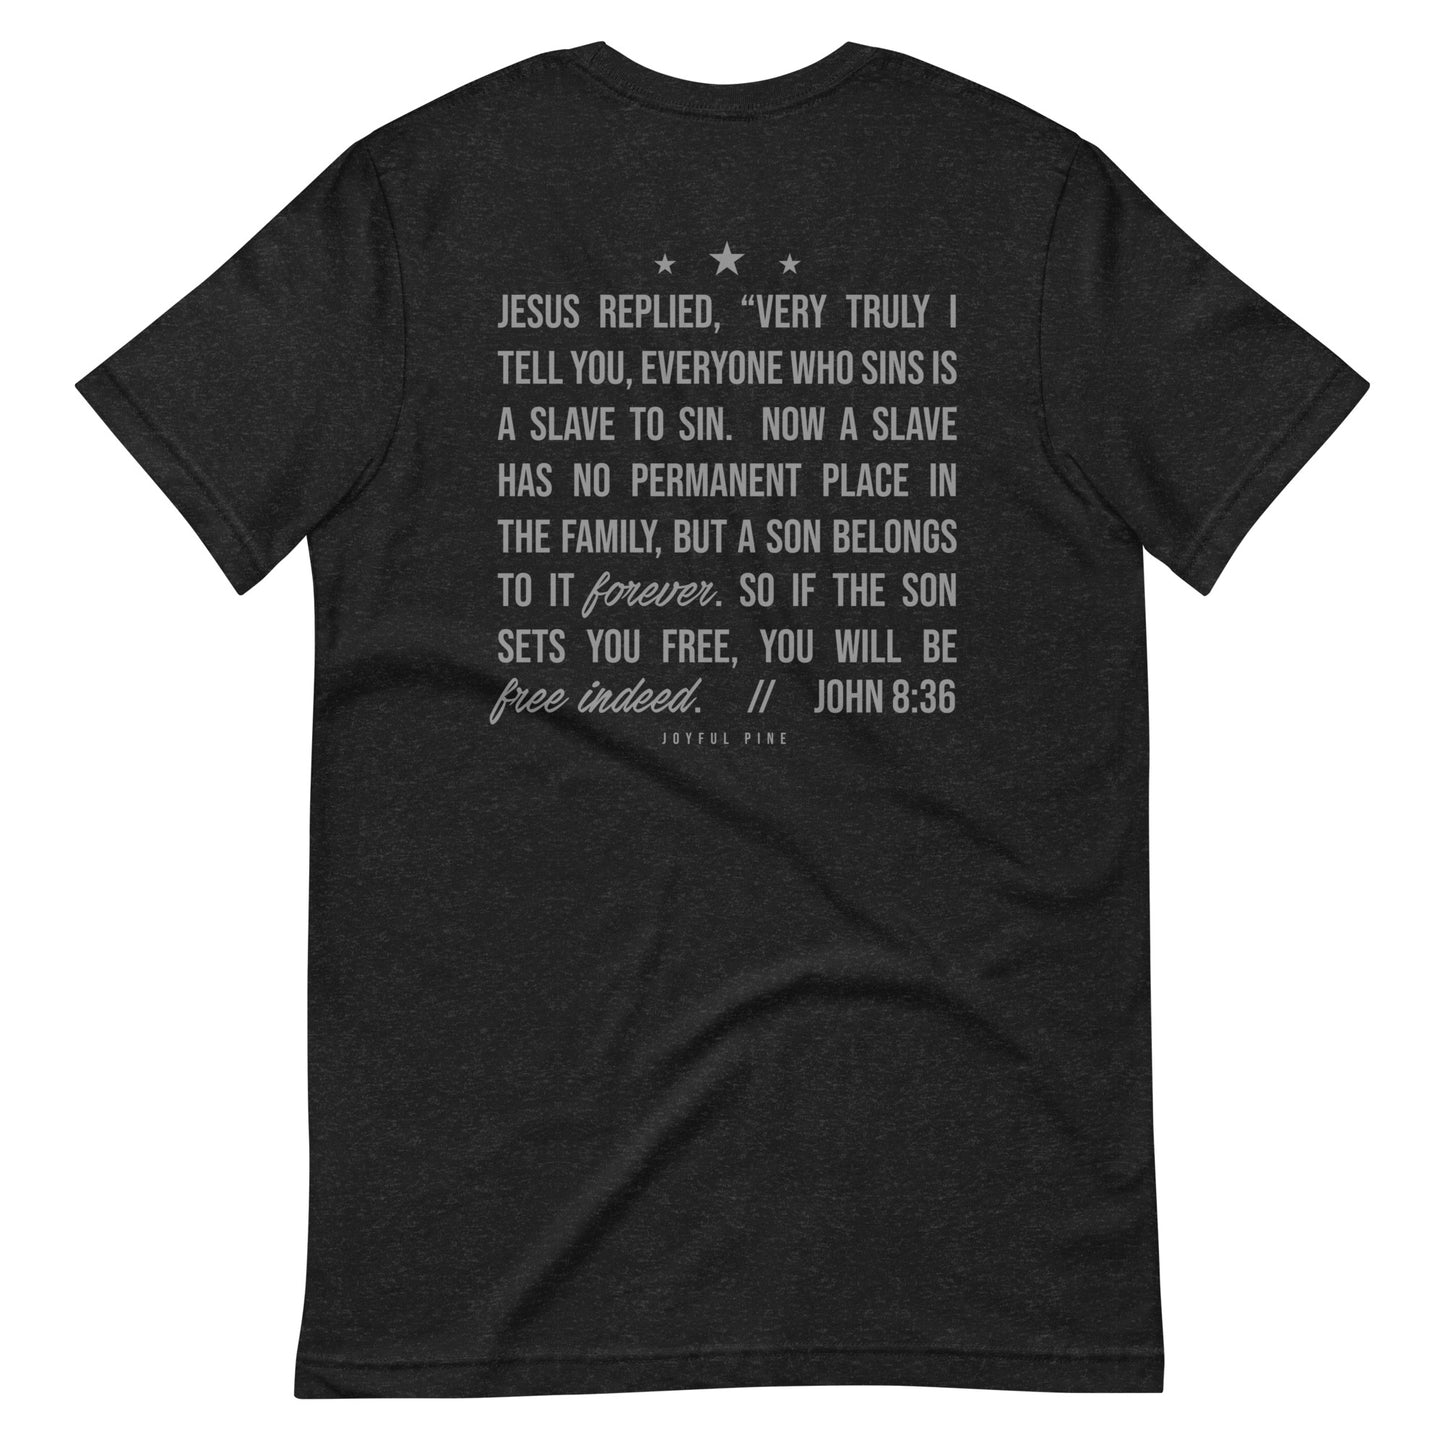 Forgiven and Free Indeed Men’s Patriotic Tee